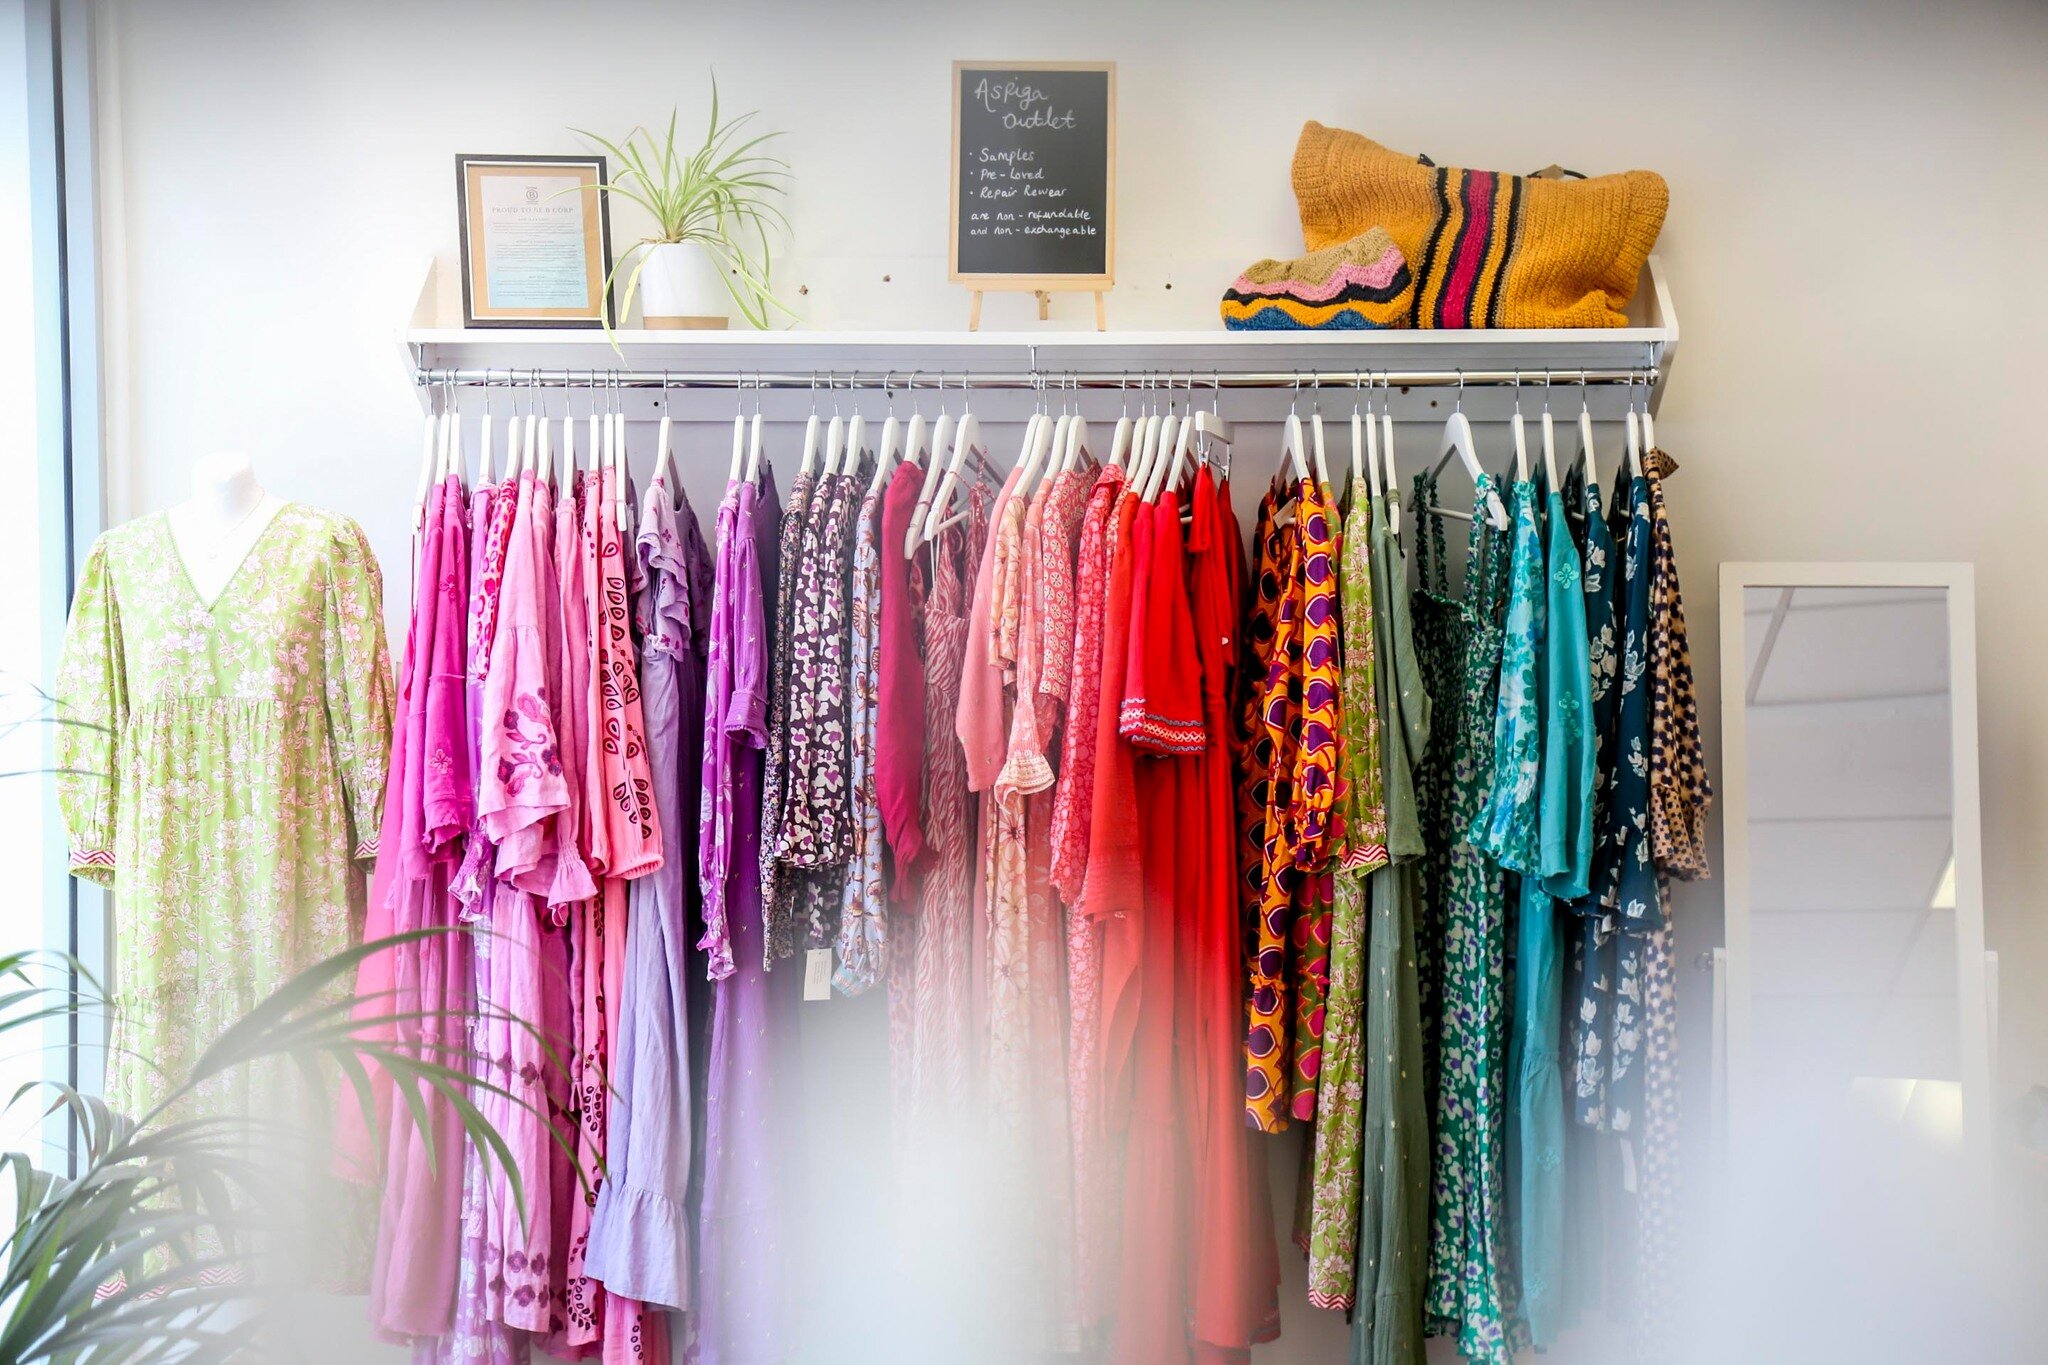 Our favourite sustainable and ethical clothing brand, Aspiga at The Guild, Wilton has moved from their shop in the Historical Courtyard to a new store in the New Square. 

Their team can't wait to welcome you all to their new space filled with all yo